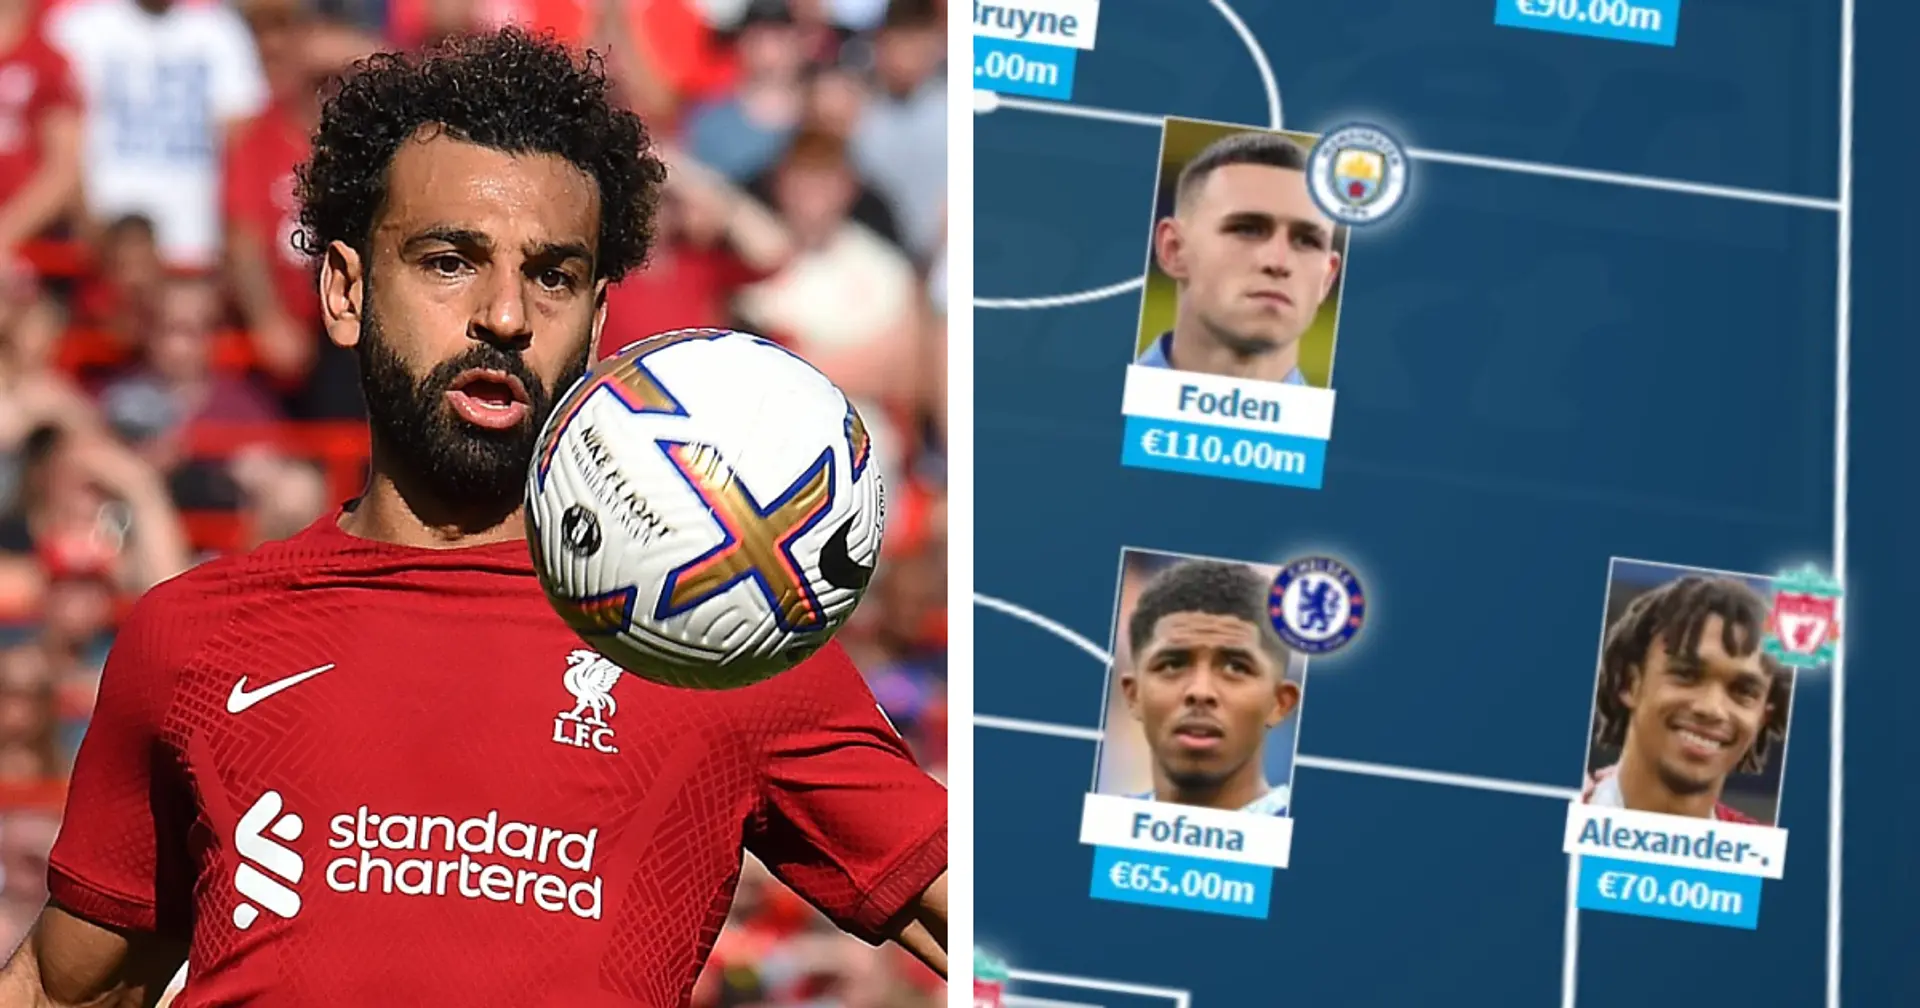 3 Liverpool players in, but no Salah: most valuable Premier League XI updated